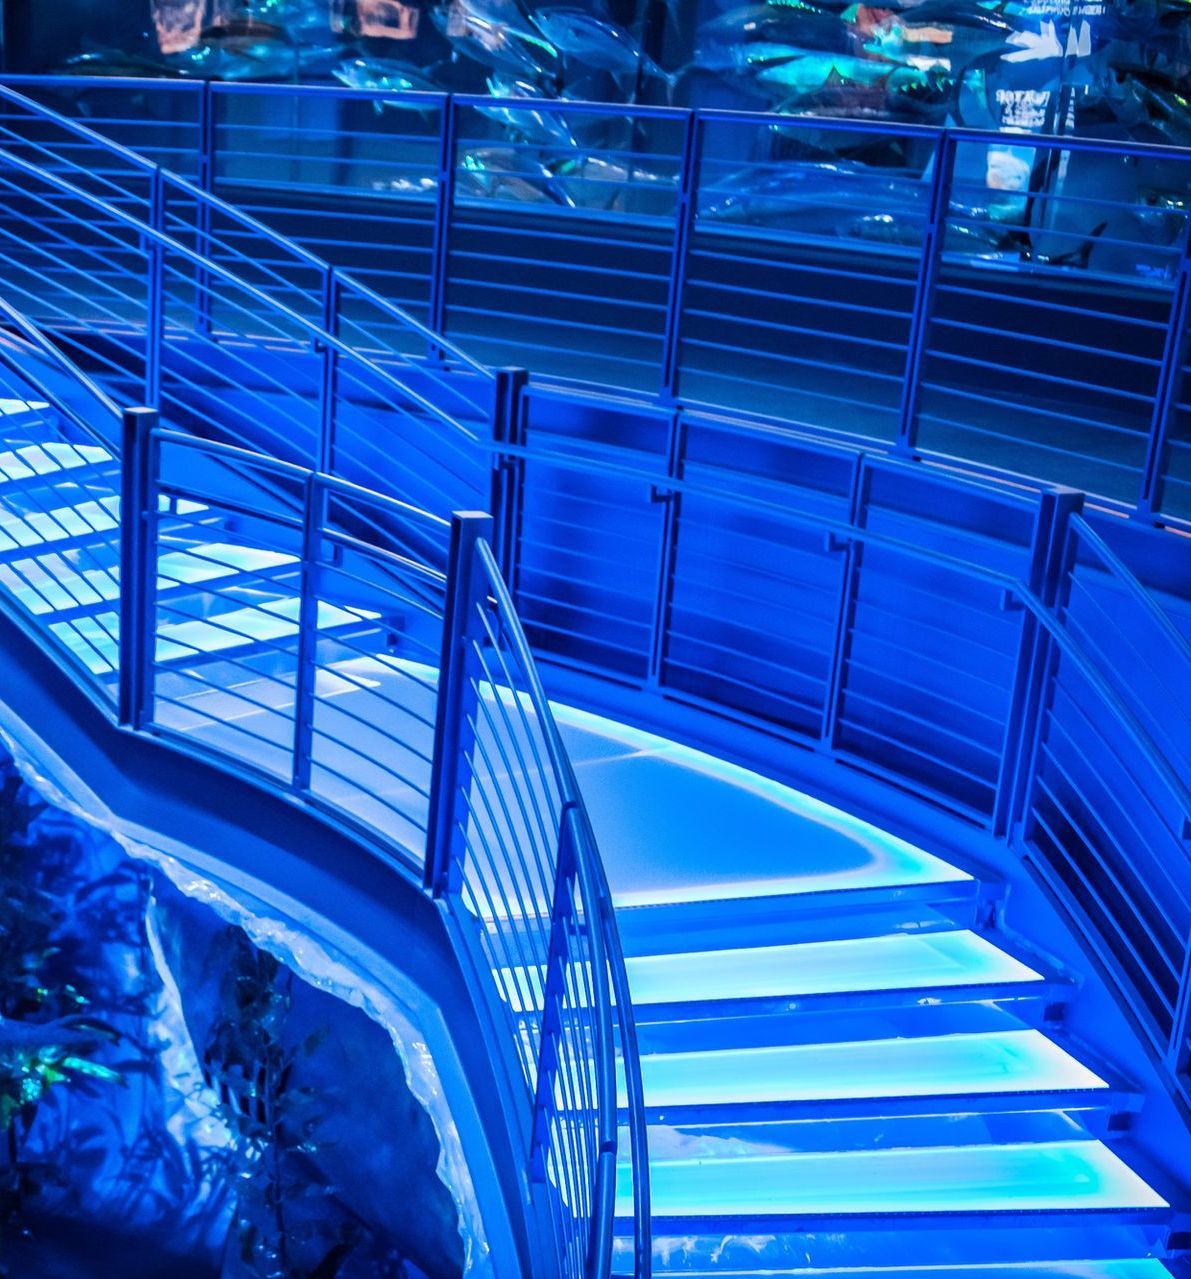 Glass flooring at Bass headquarters with blue LED backlighting.